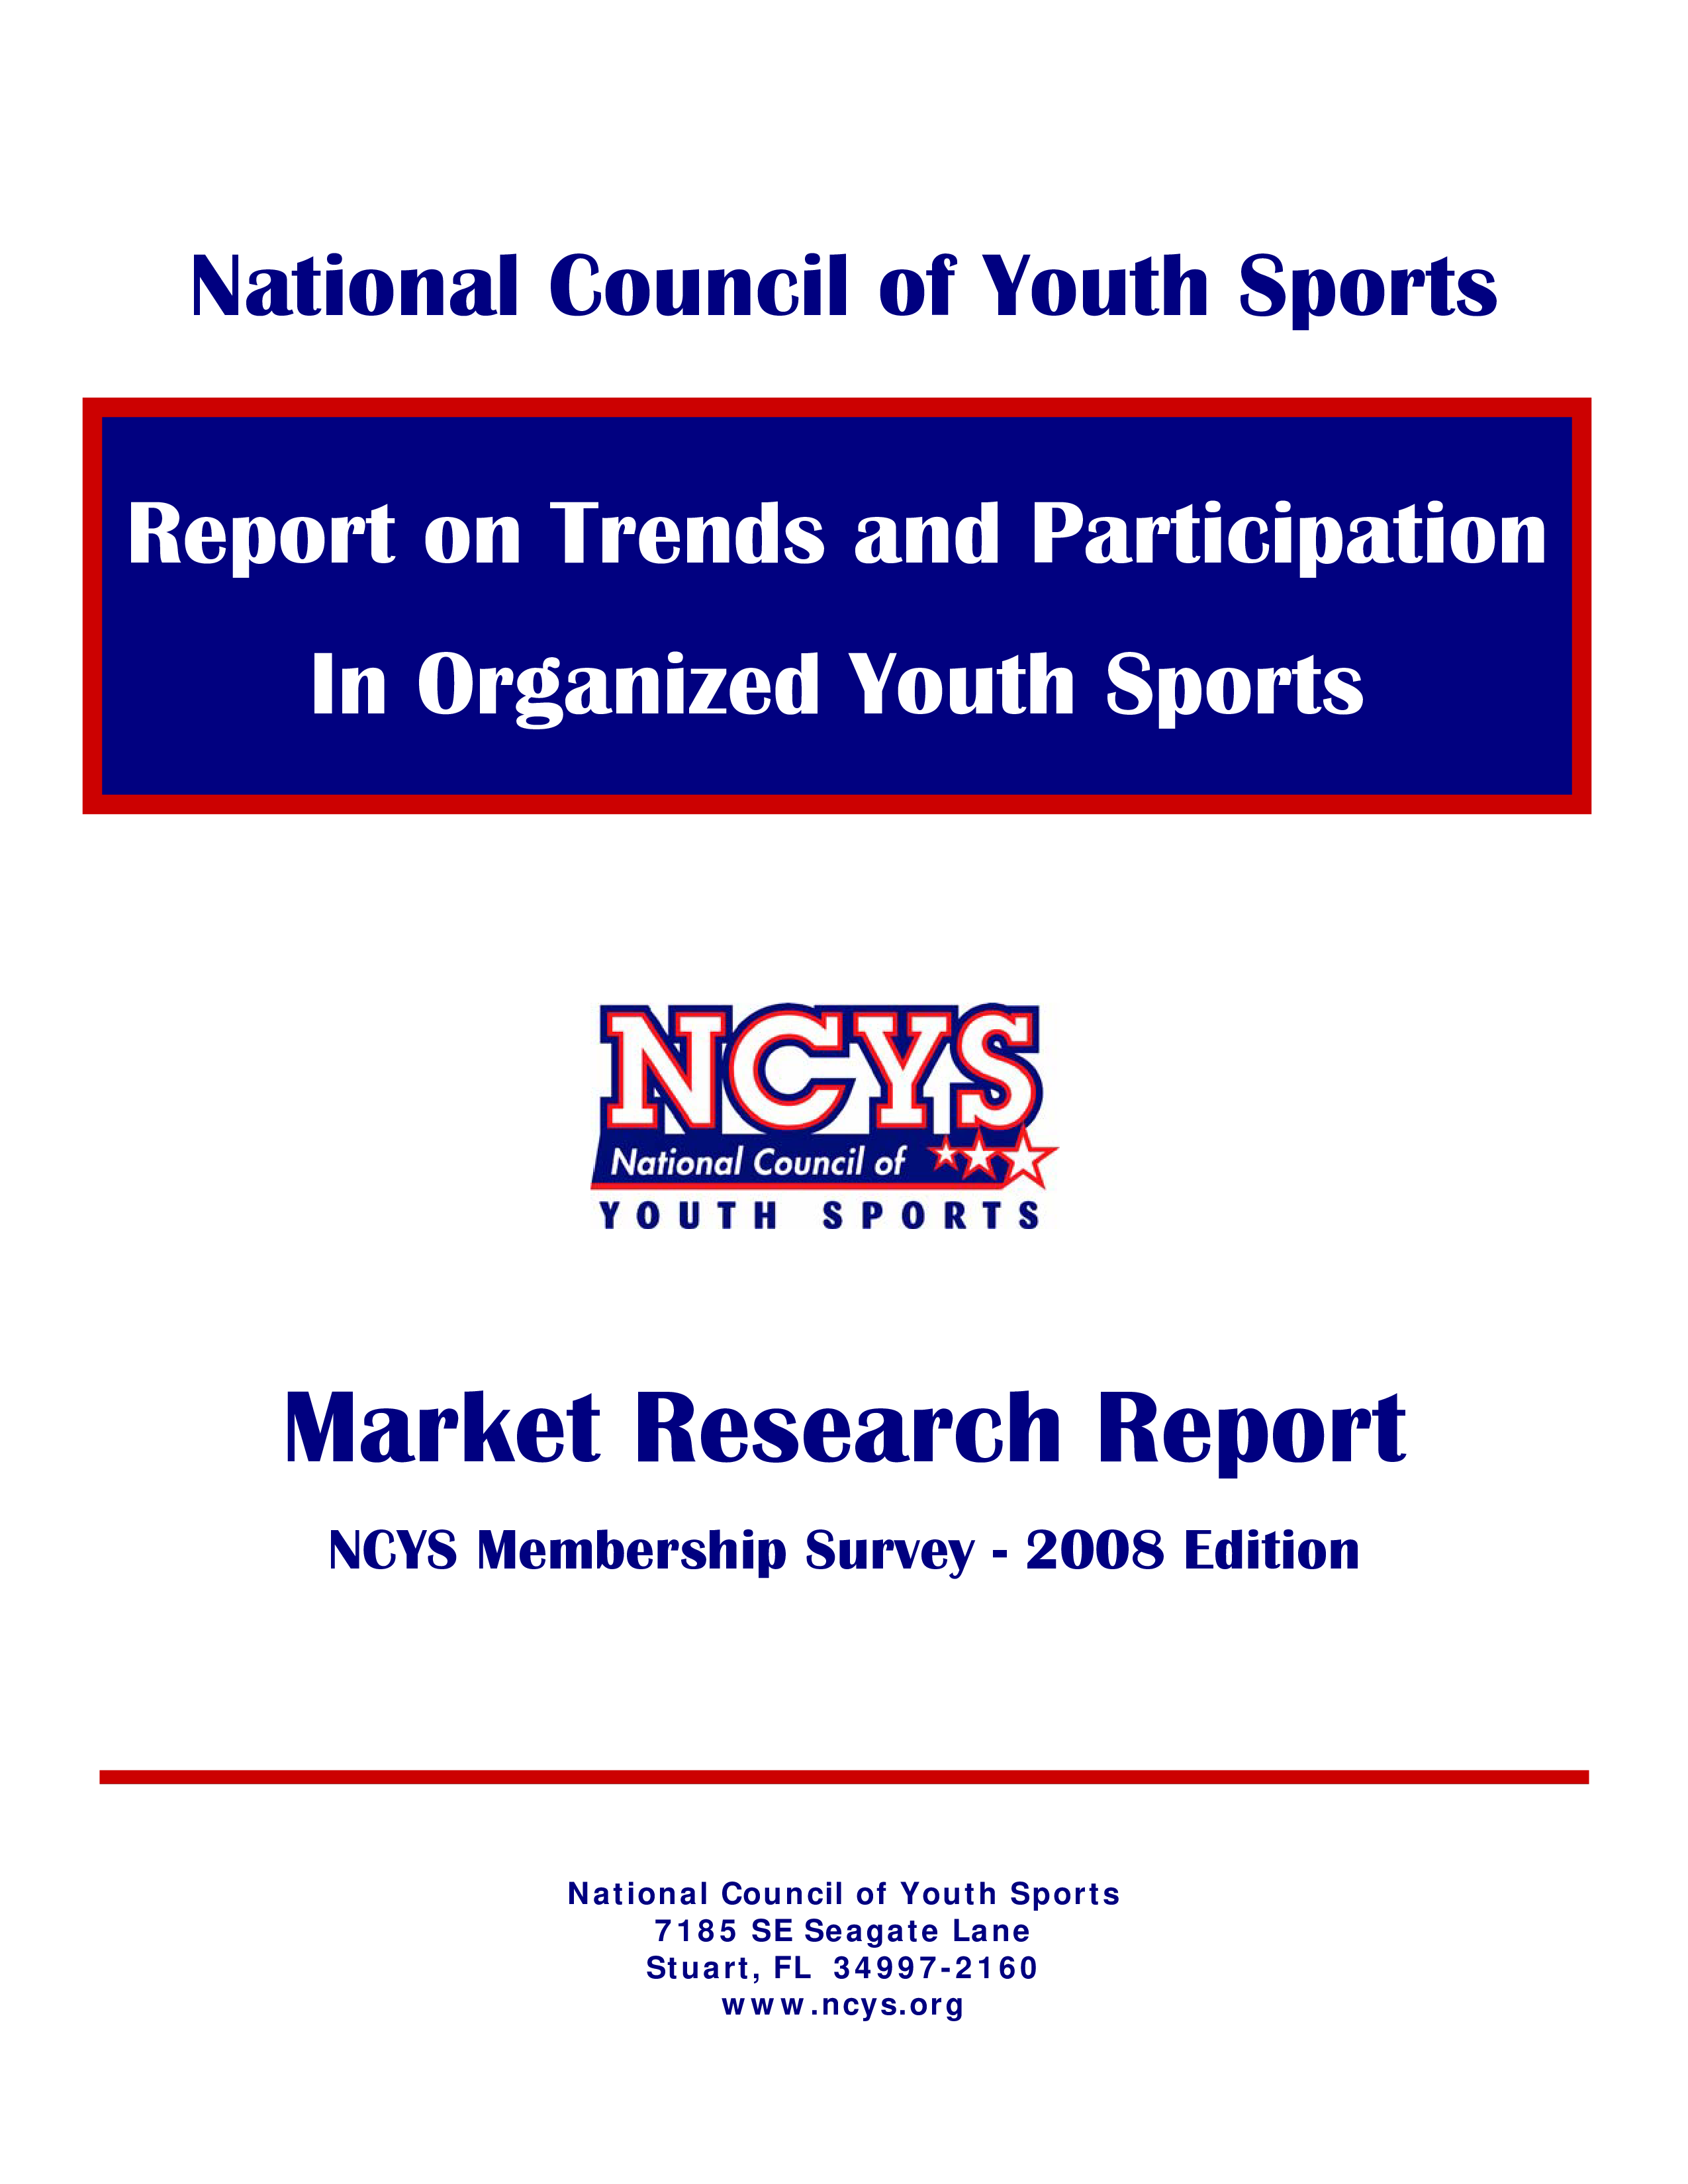 Market Research Report based on Survey Results main image